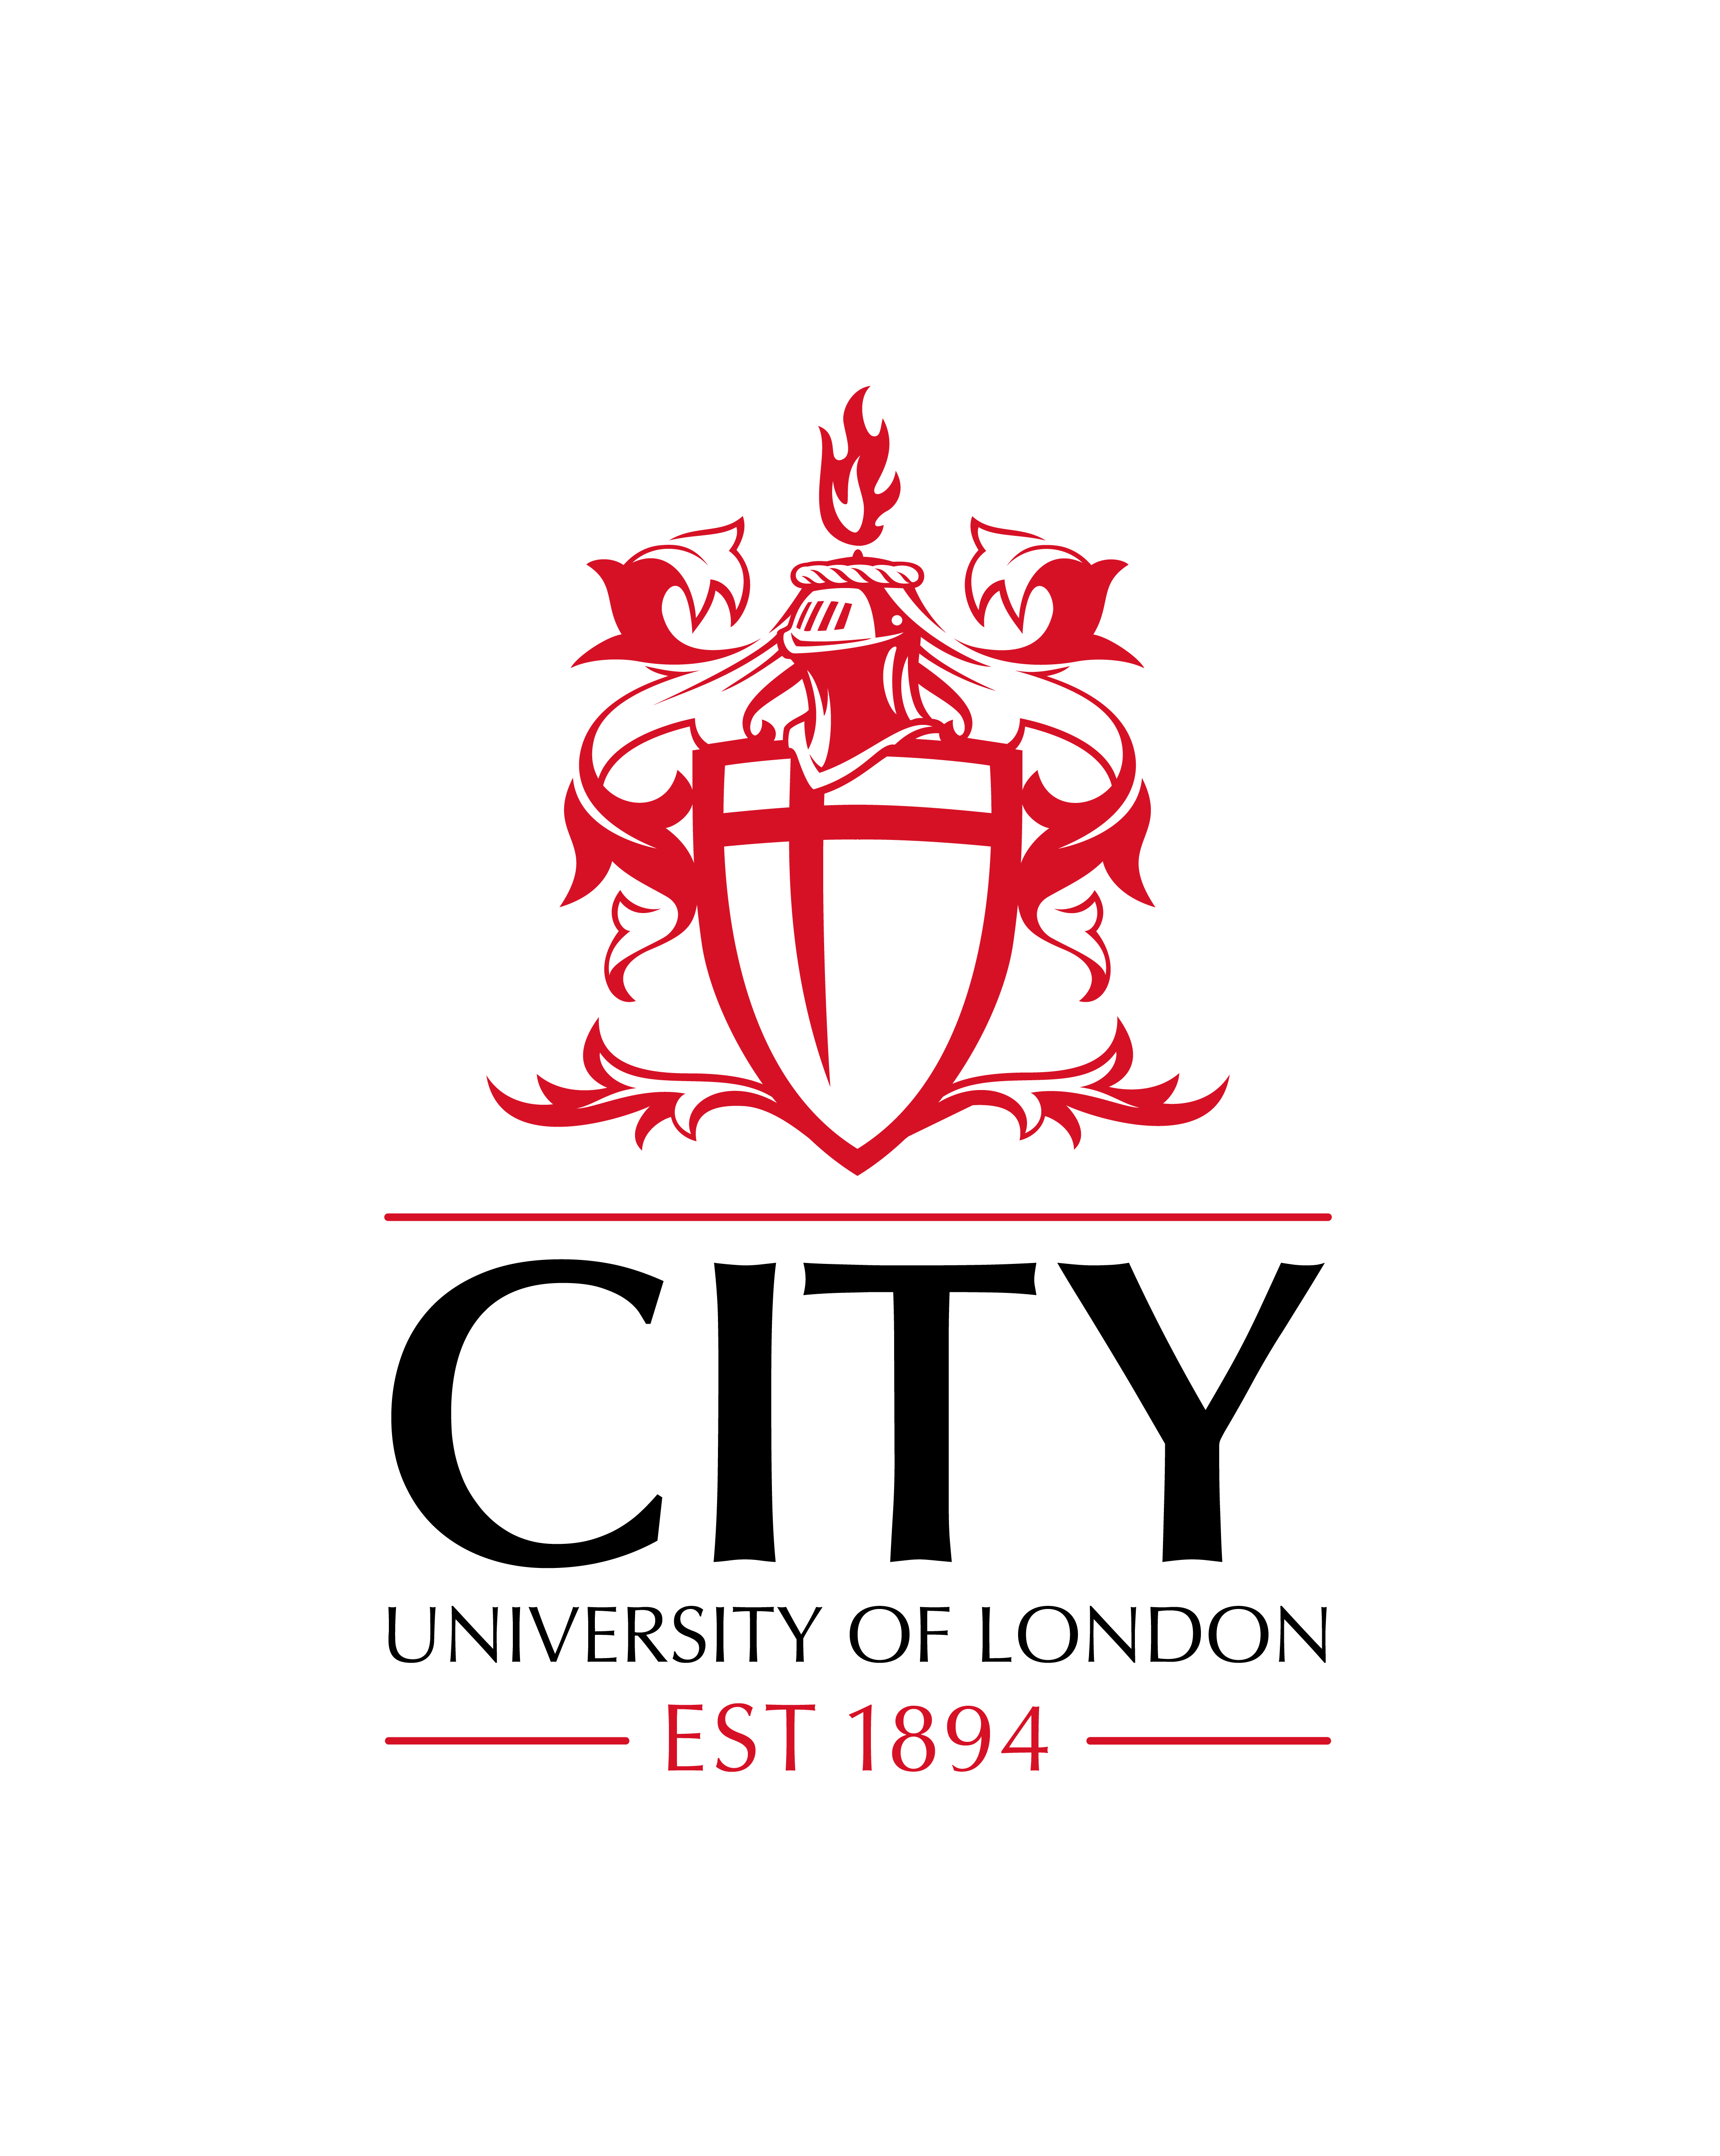 City University are exhibiting at Nursing Careers and Jobs Fair